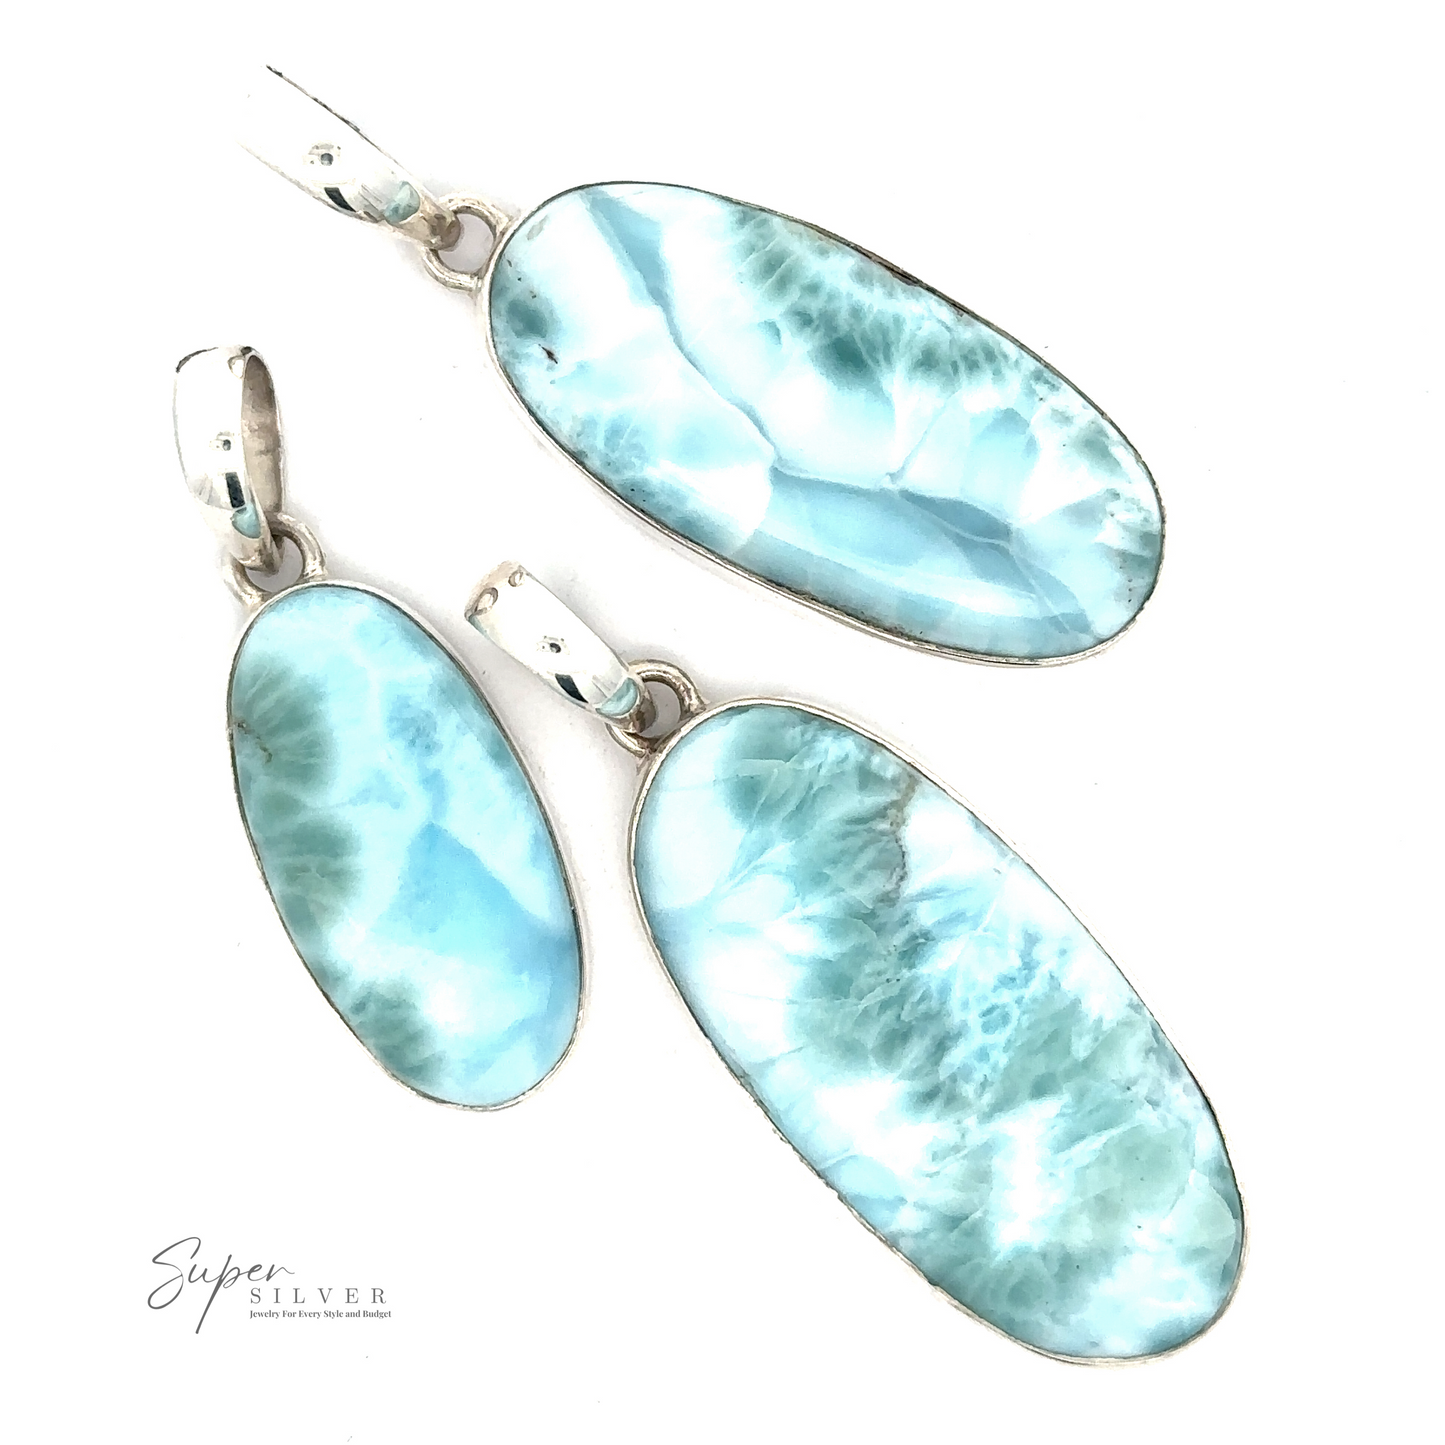 
                  
                    Three Beautiful Long Oval Larimar Pendants with .925 Sterling Silver settings are arranged on a white background. The pendants, featuring Larimar from the Dominican Republic, display a marbled pattern and varying shades of blue. "Super Silver" is visible in the bottom left corner.
                  
                